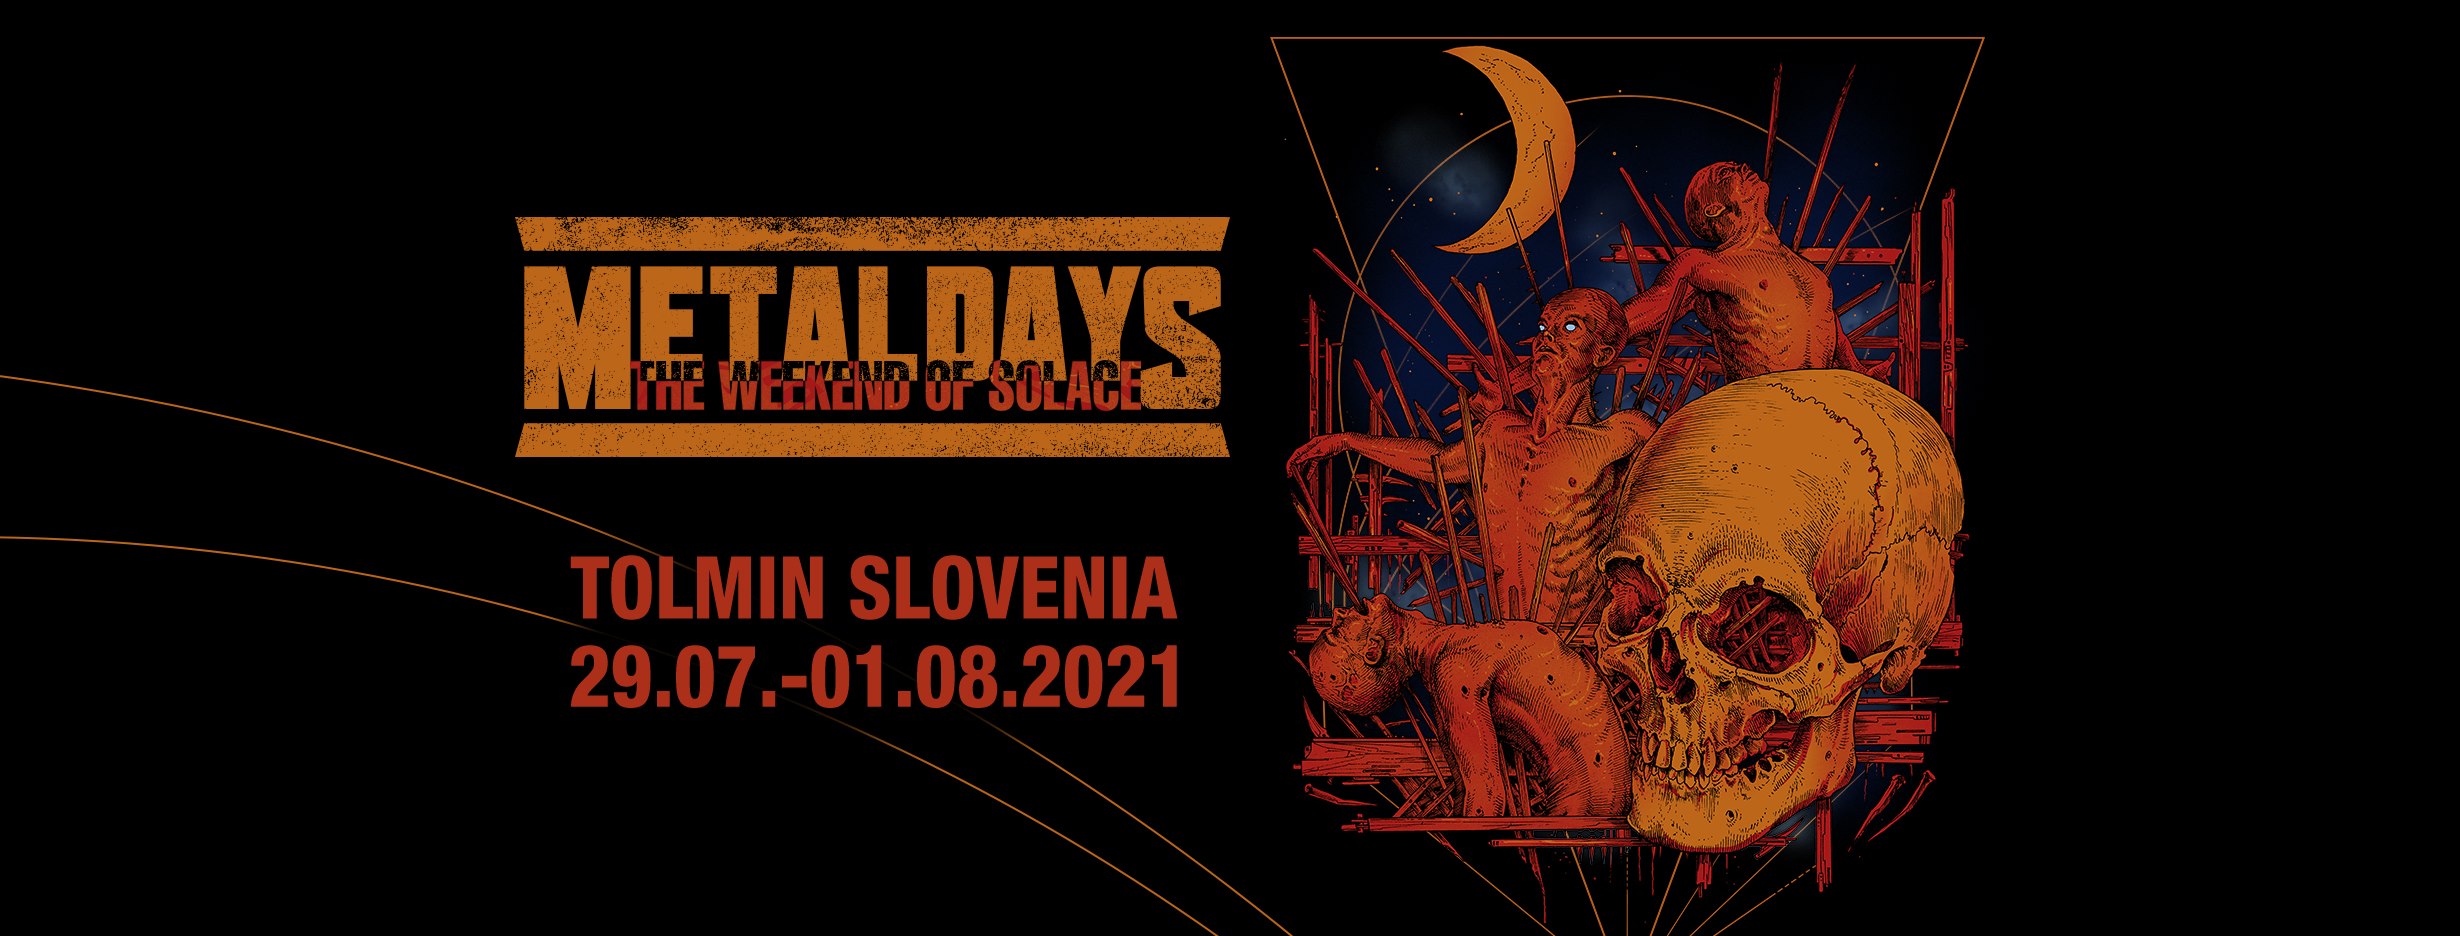 MetalDays - The Weekend of Solace - EventiFVG.it